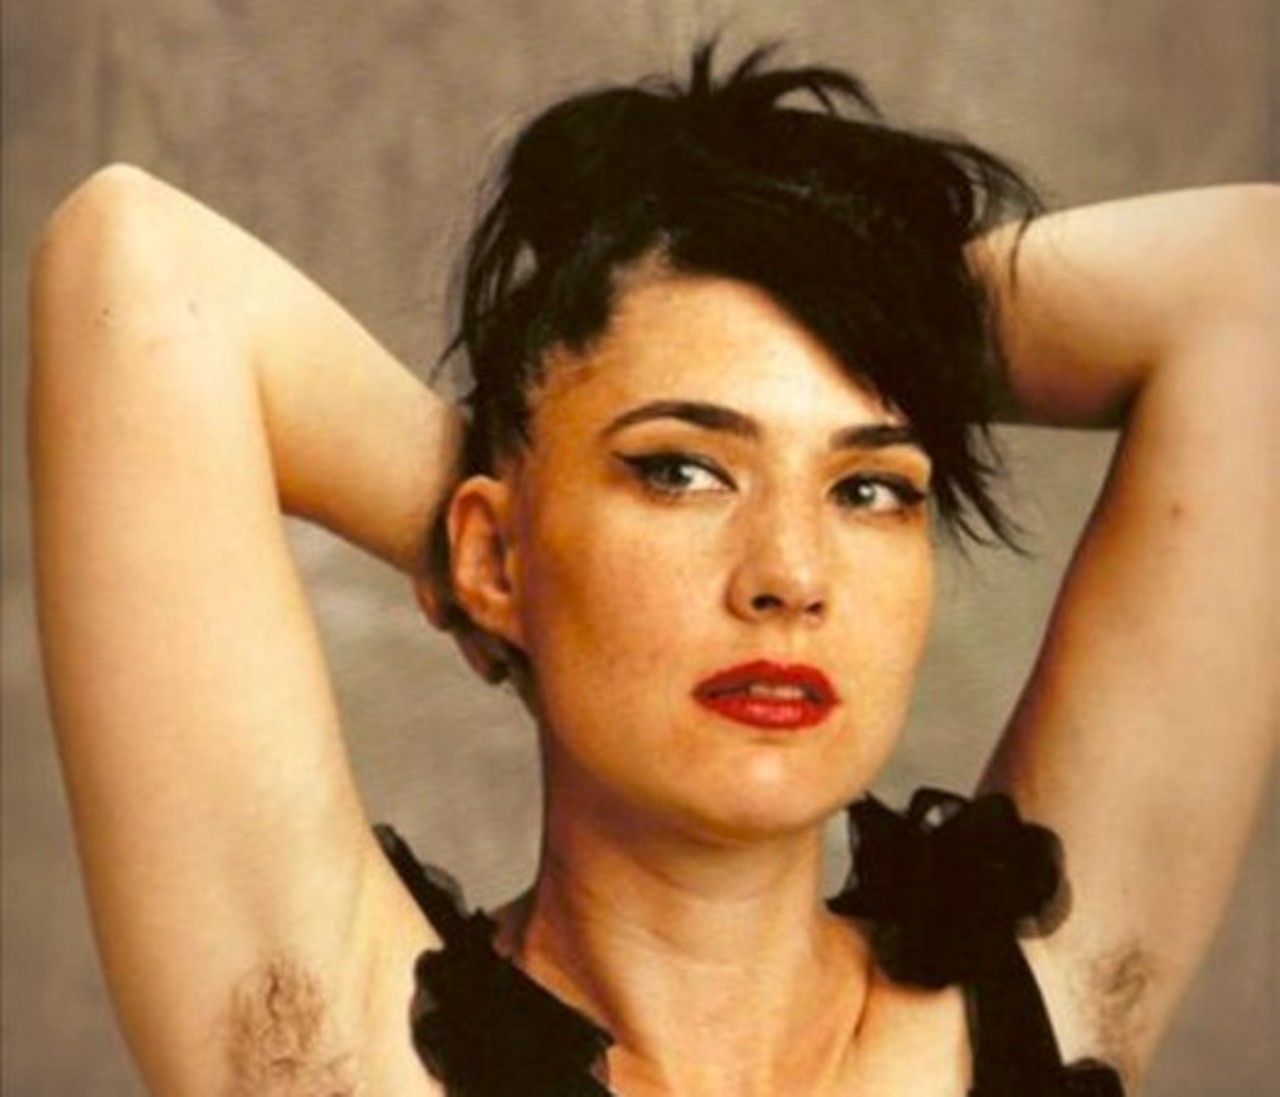 Before she formed the riot grrrl act Bikini Girl in 1990, singer Kathleen Hanna was just another private school student trying to find herself. Contrary to popular opinion, the teachers at trendy Evergreen College in Olympia, Wa. didn't take kindly to her literary experiments so she refrained from letting her emotions go. But then she met underground writer Kathy Acker and realized she didn't need to hold back. Acker helped her channel her more extreme impulses, and it wasn't long before Hanna was fronting the abrasive and openly feminist Bikini Kill. Hanna's history is well documented in the The Punk Singer, a terrific documentary that shows just how off putting the band's music (and politics) could be. The movie screens at 7:30 tonight and at 9:10 tomorrow night at the Cleveland Institute of Art Cinematheque. Tickets are $9. (Niesel)